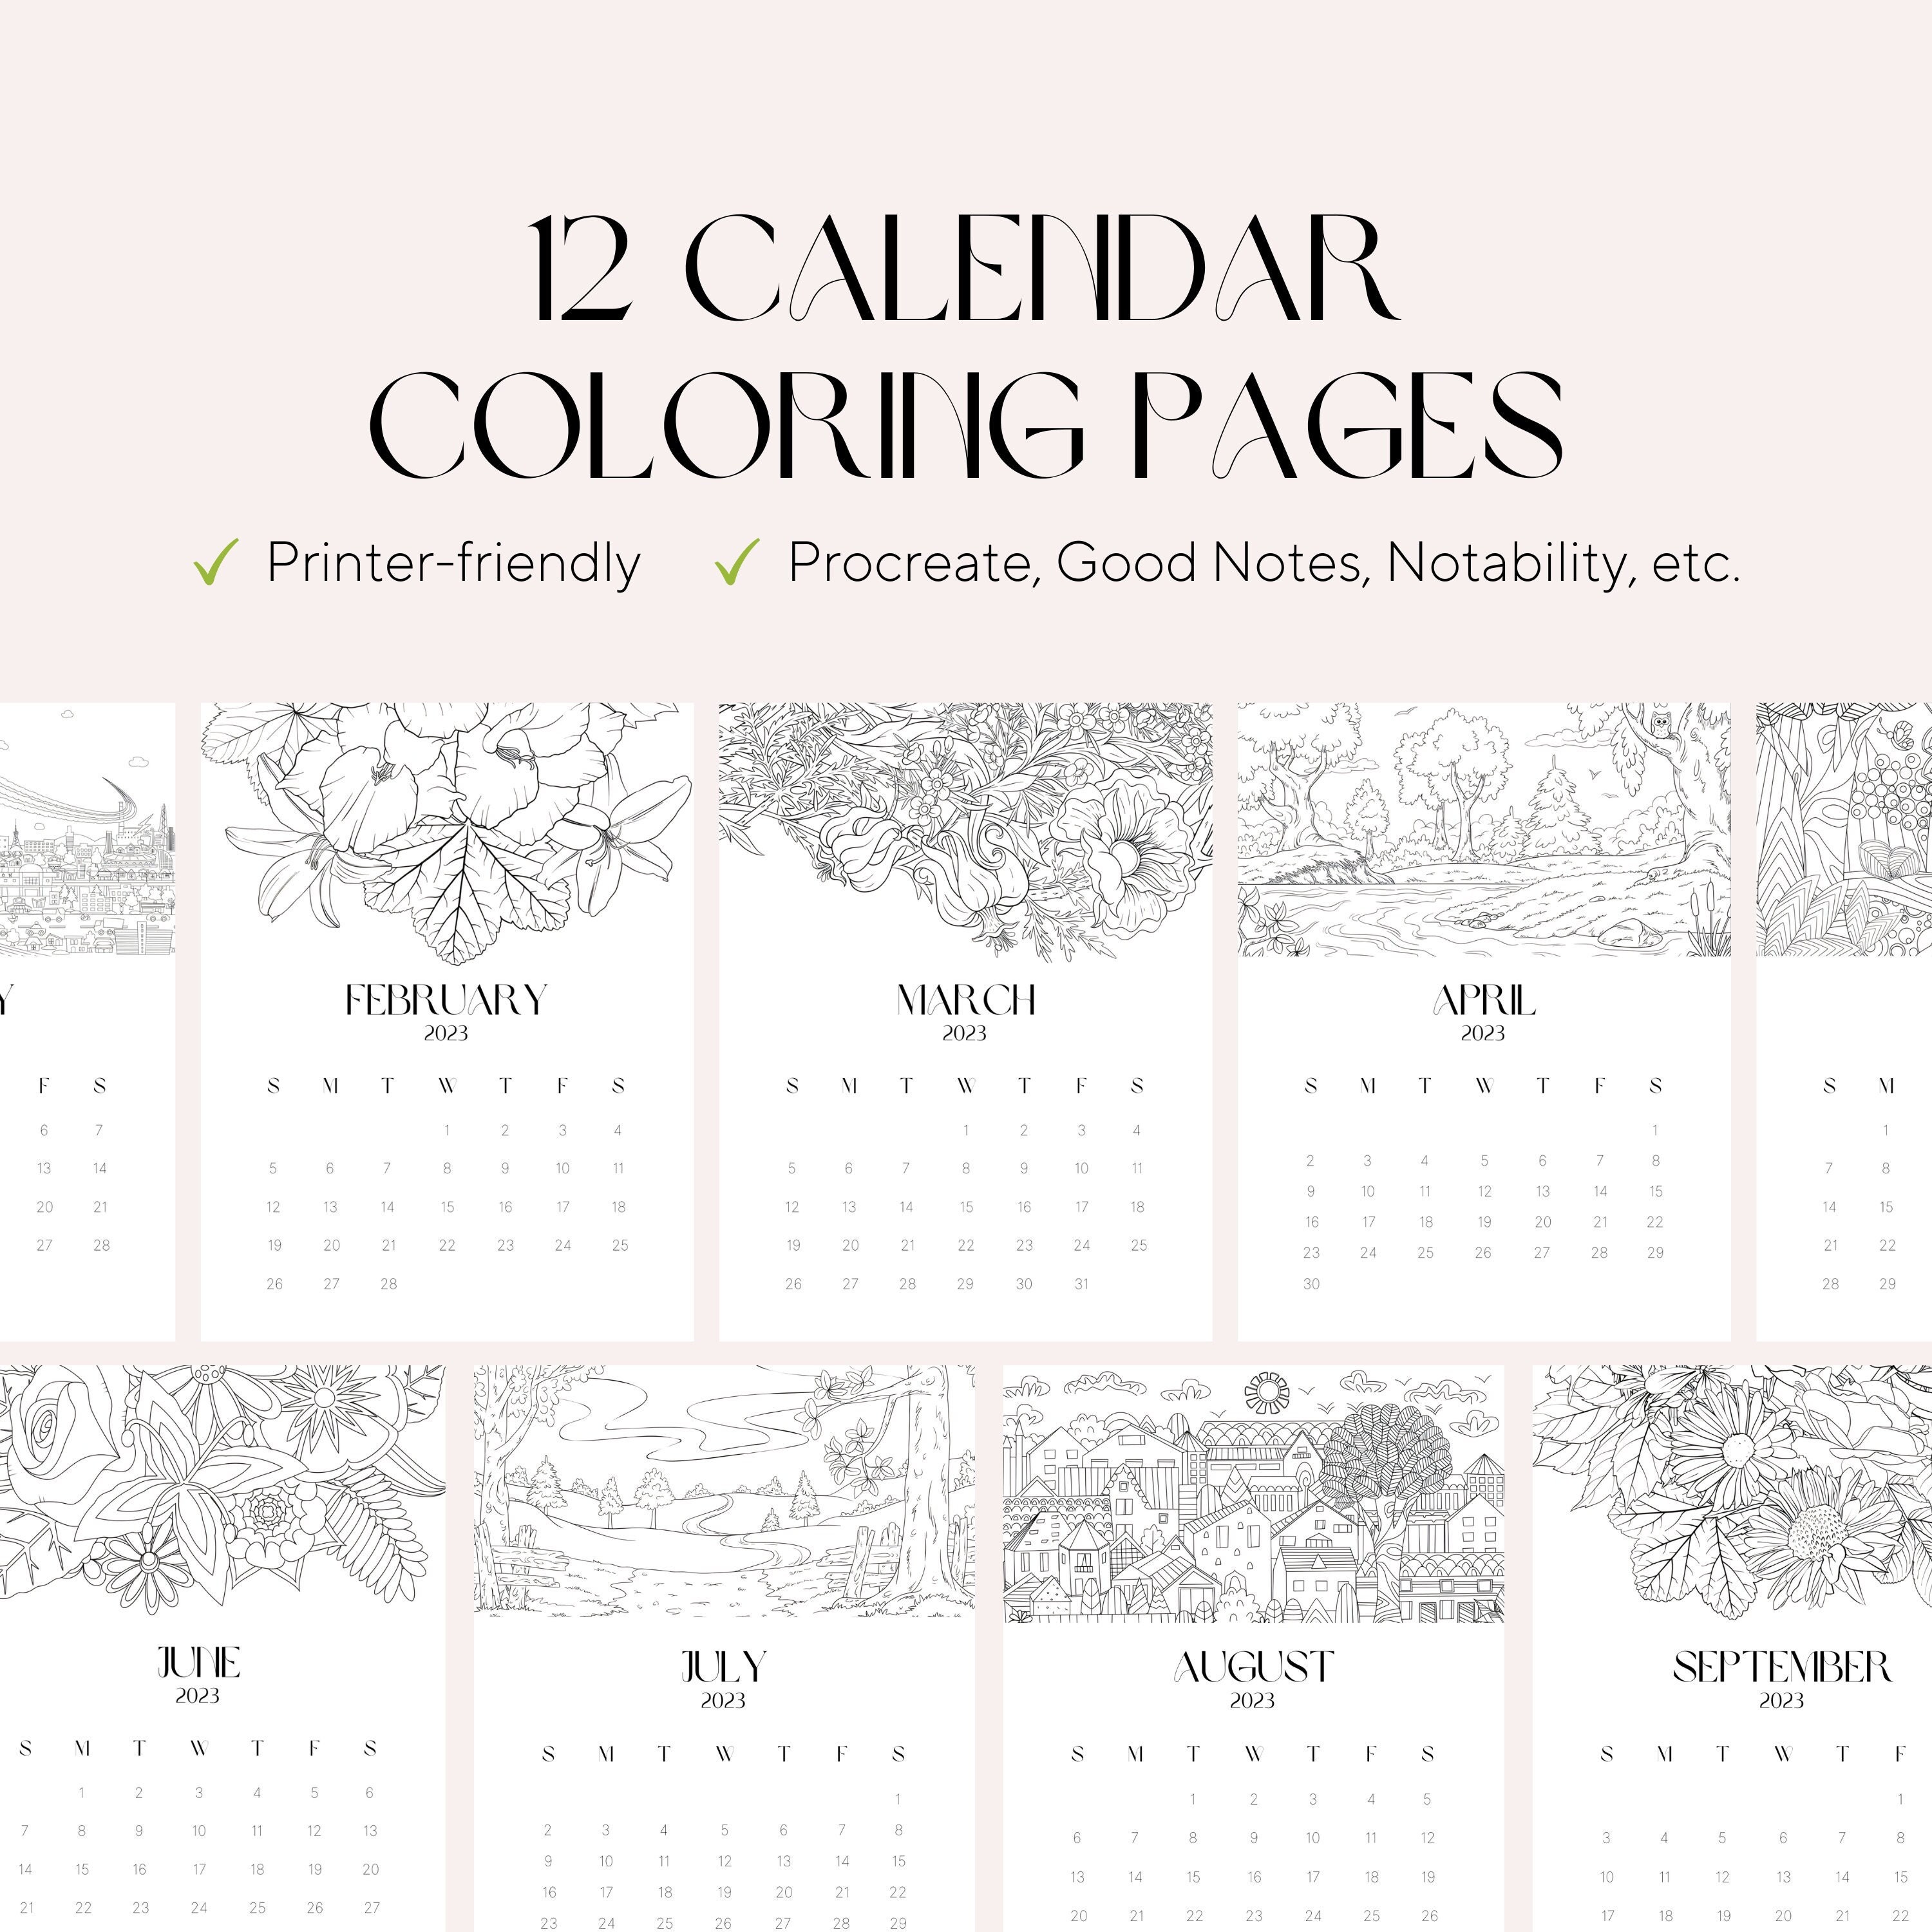 Daily Coloring Planner Printable 2024 Calendar Adult Coloring 2